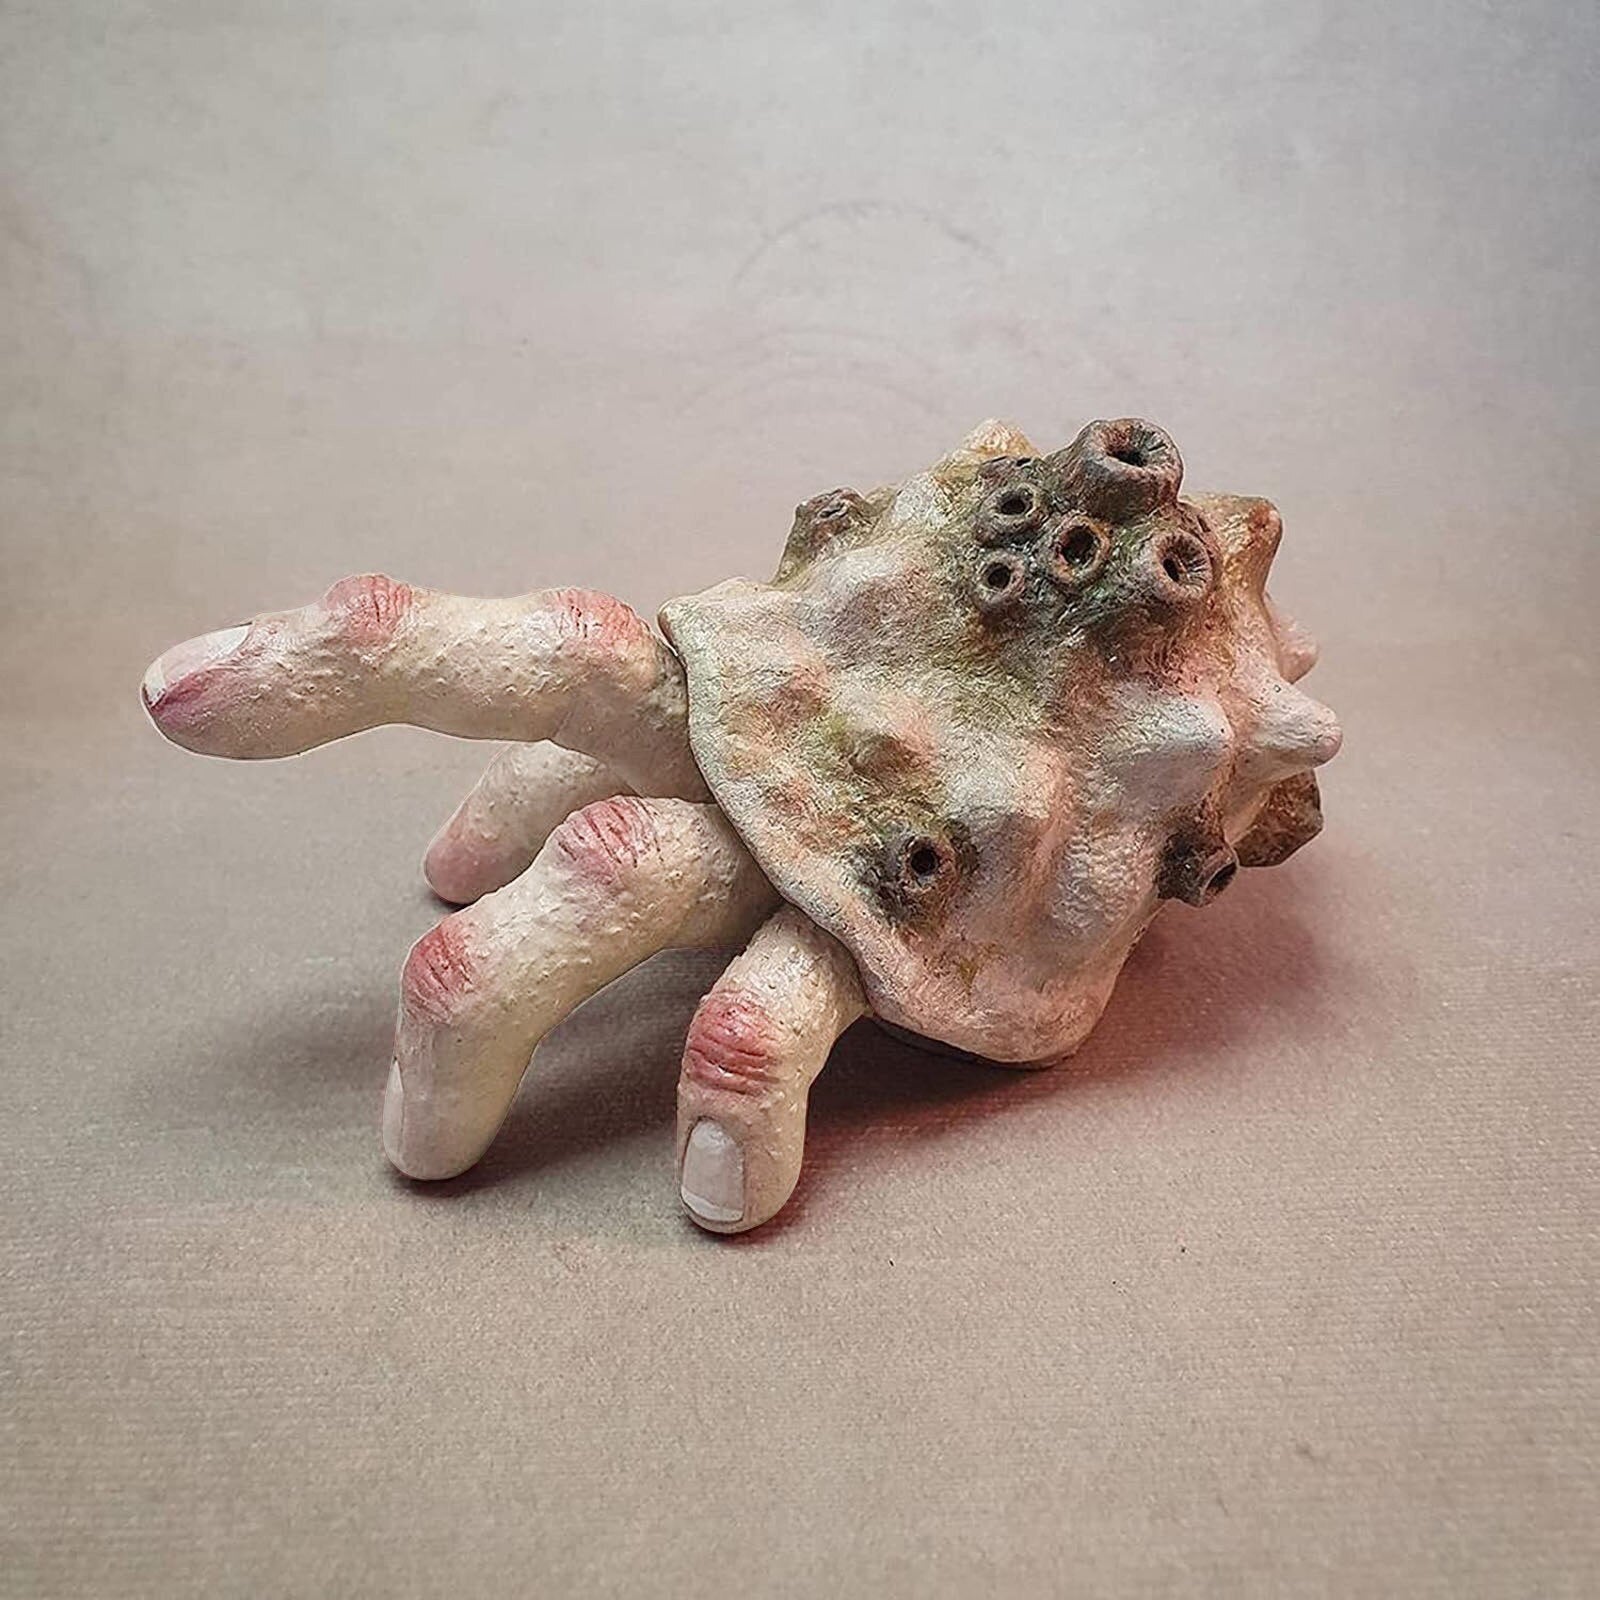 A hermit crab finger sculpture which has 6 fingers and appears to be walking with one finger in the air.